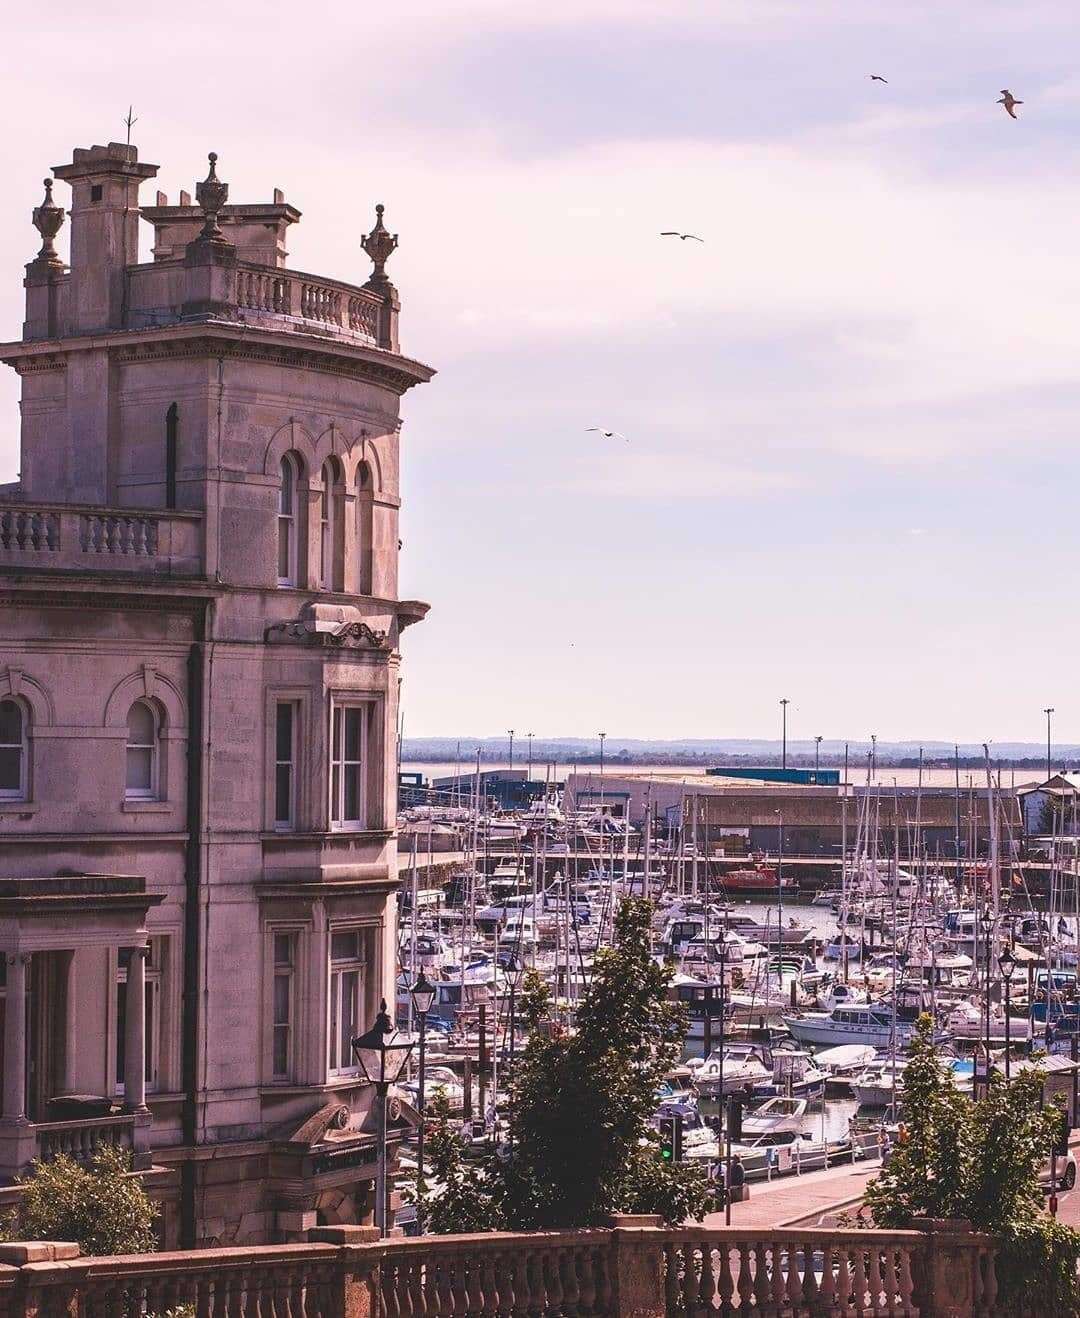 Ramsgate Harbour. Photo: andrewmlphotography on Instagram